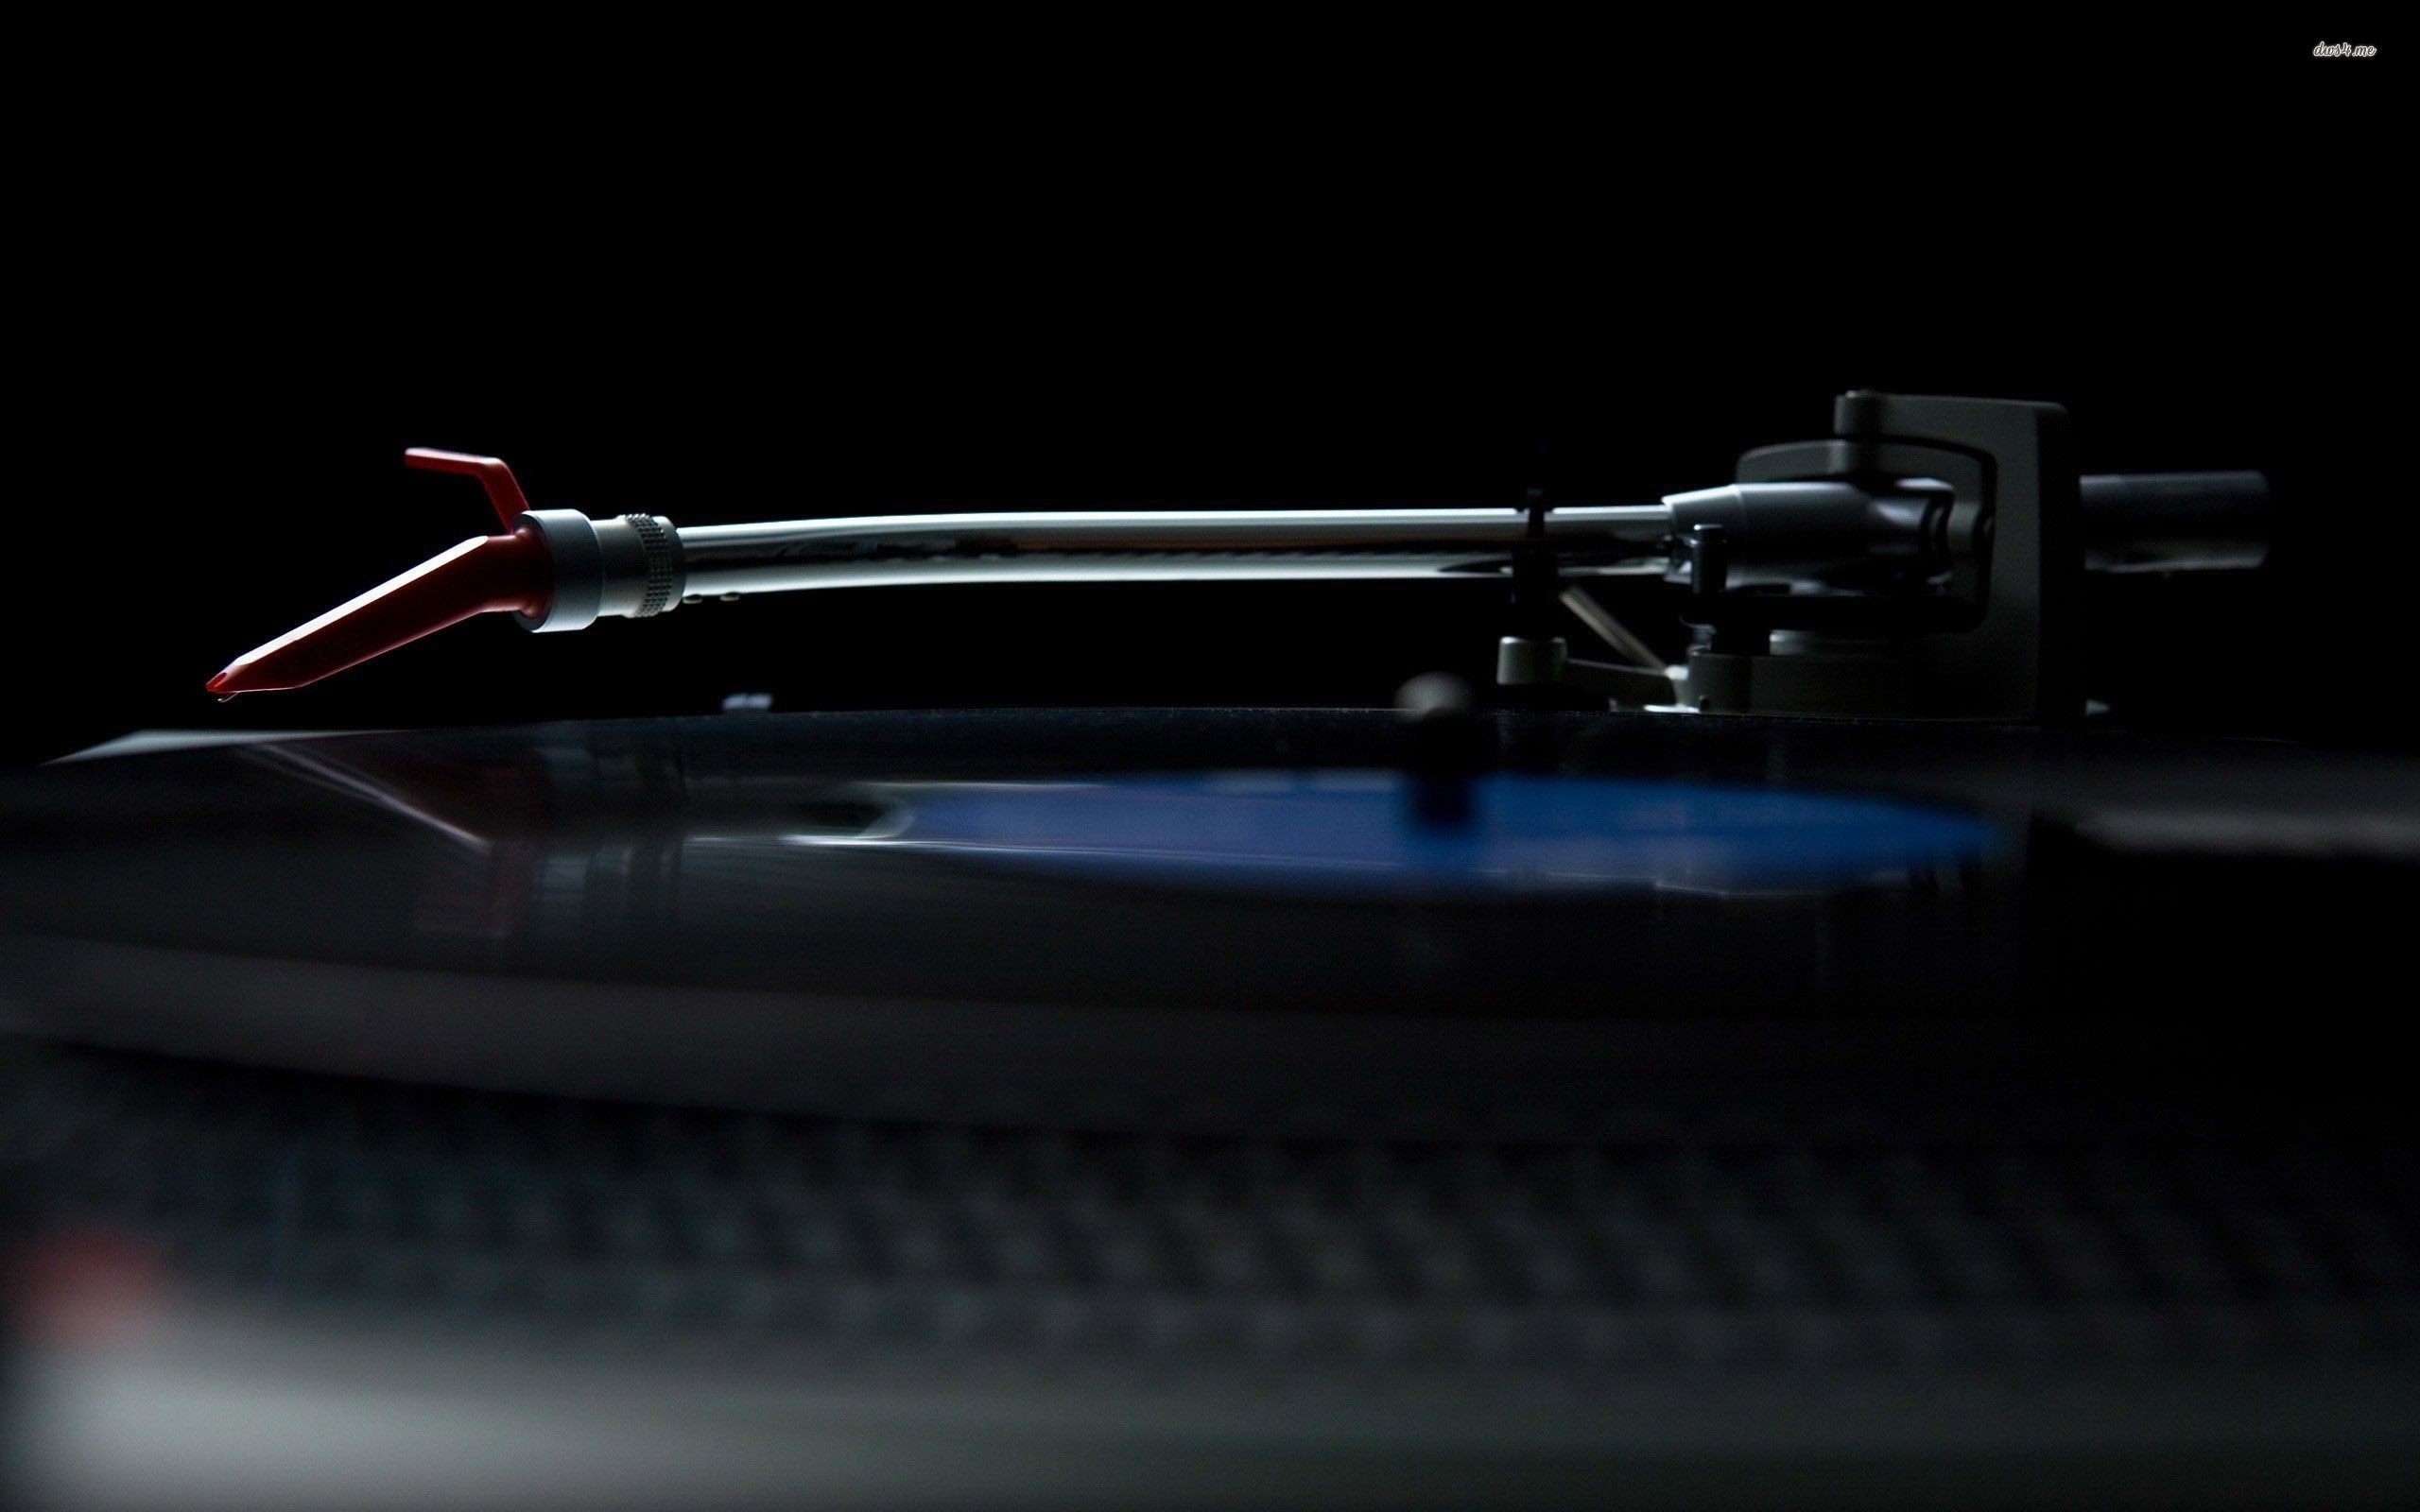 2560x1600 Turntable wallpaper - Music wallpapers - #17338